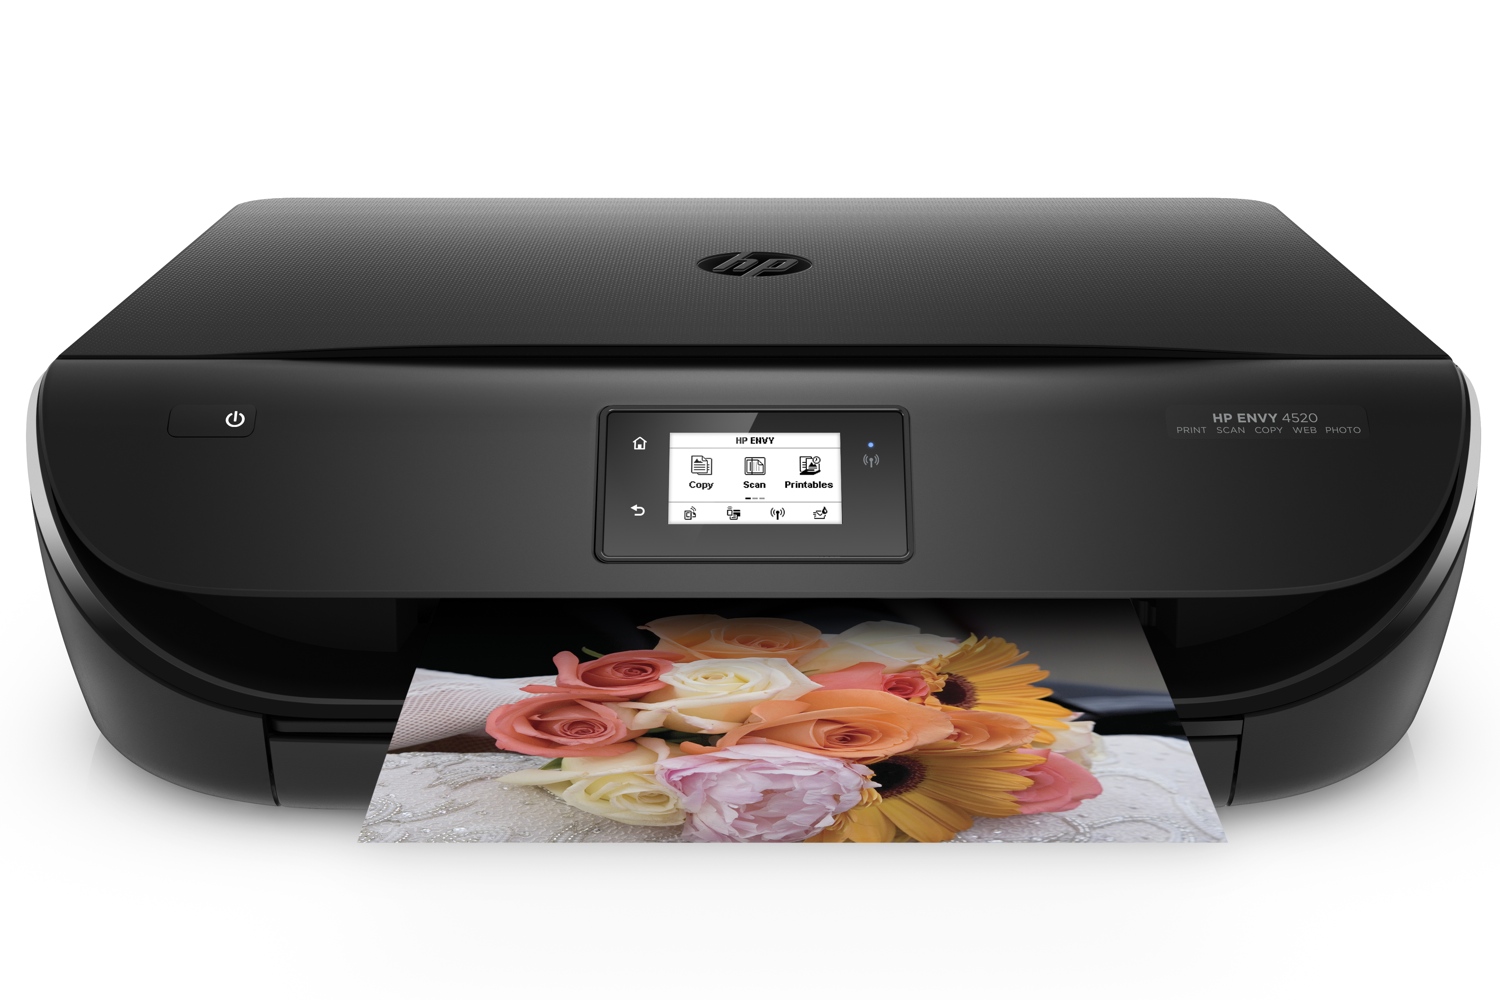 hp puts spotlight on instant ink refill program with new inkjet printers envy 4520 product